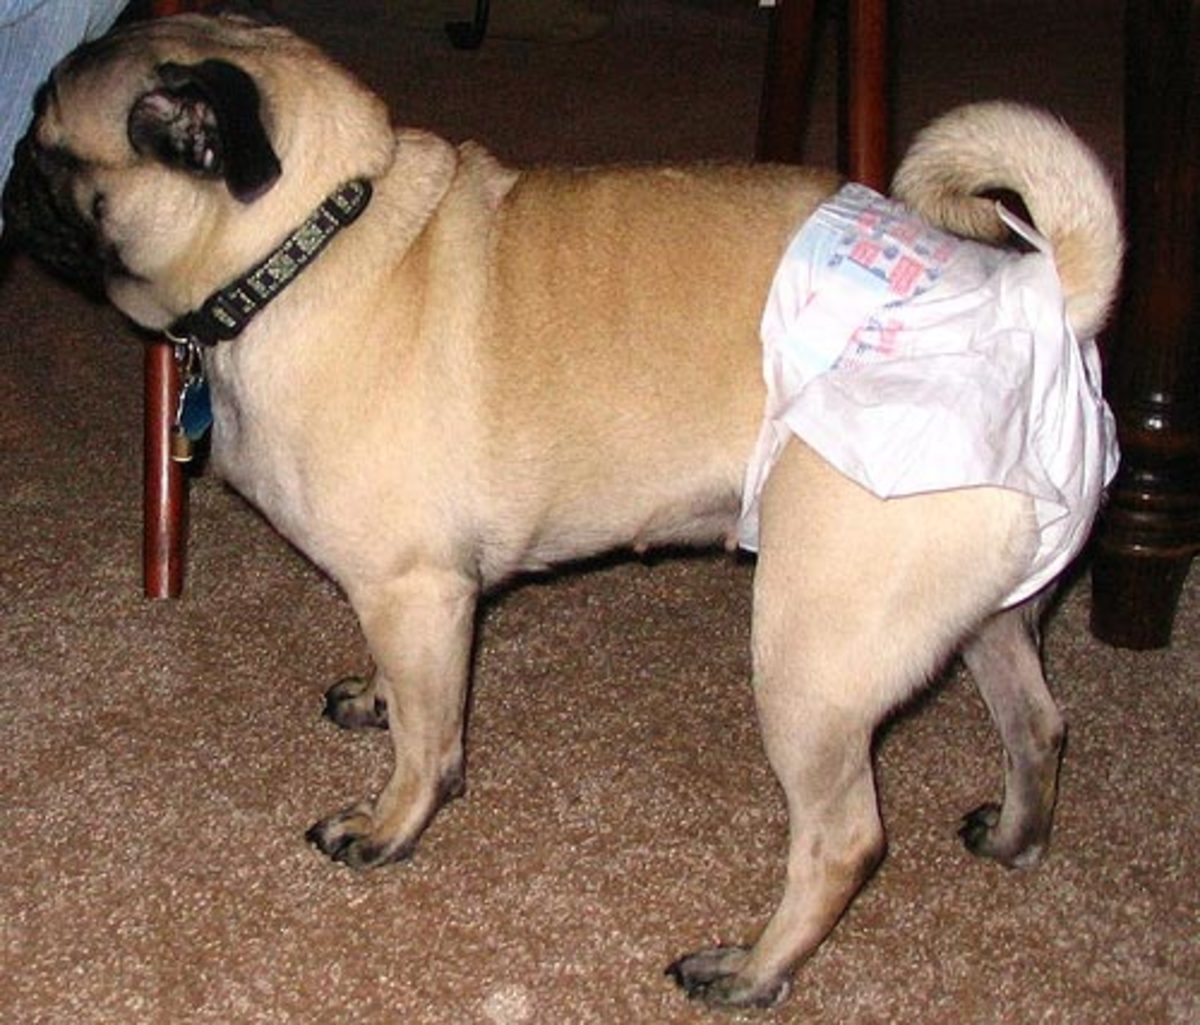 Doggie diapers are helpful when your dog is in heat.